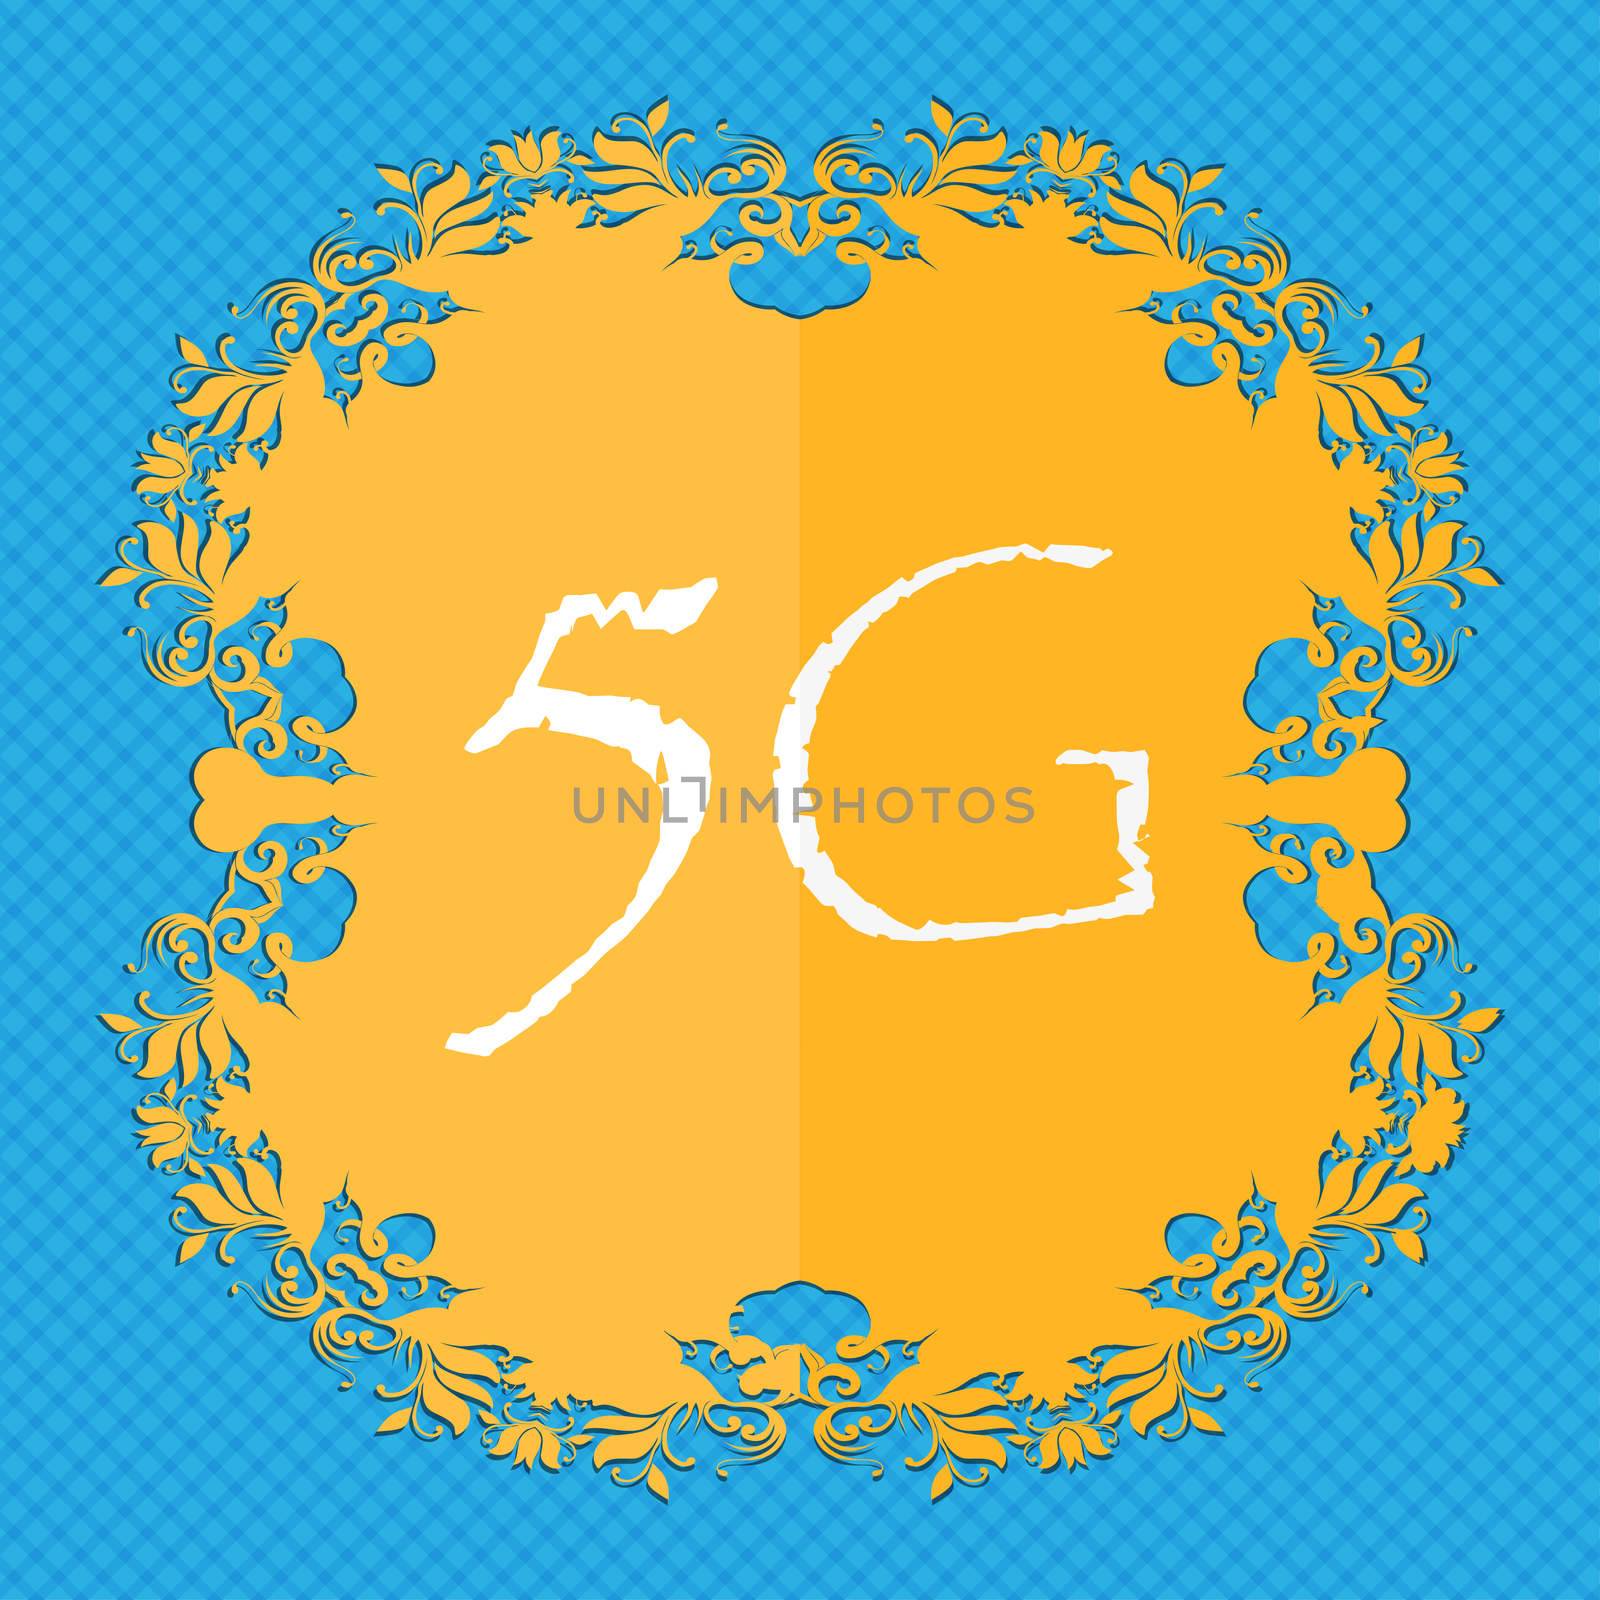 5G sign icon. Mobile telecommunications technology symbol. Floral flat design on a blue abstract background with place for your text. illustration